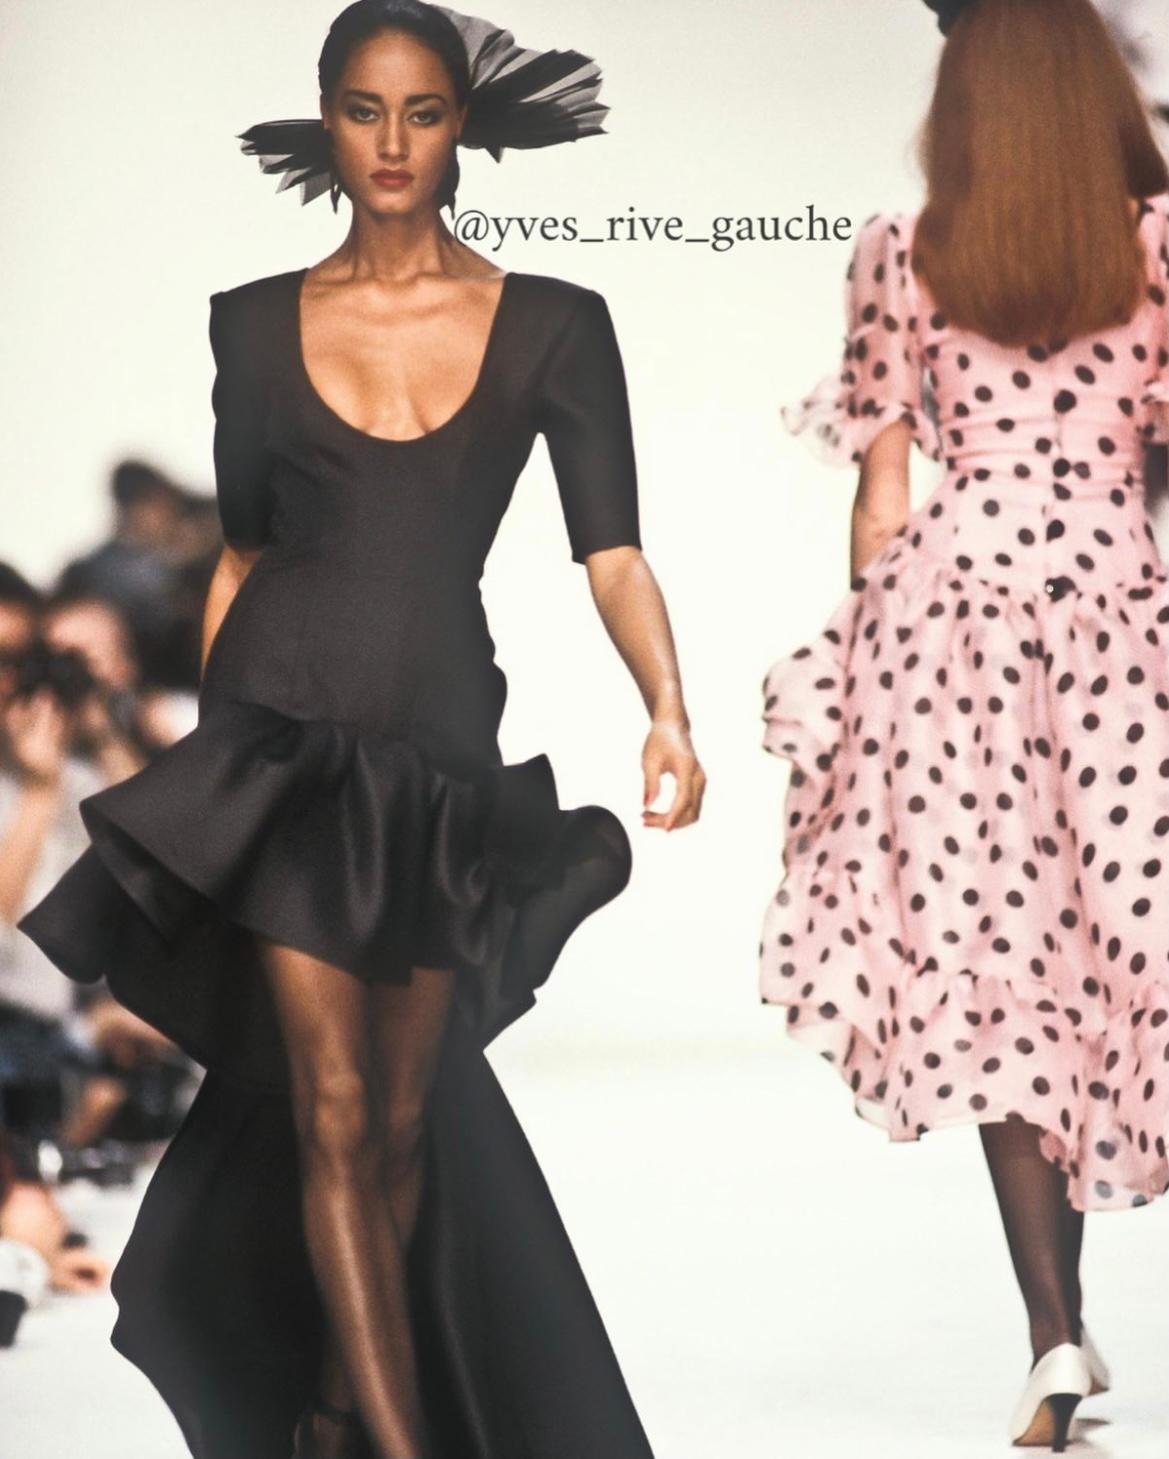 Celebrate the magic of getting dressed-up for a special occasion with this standout SS1990 runway evening piece by YSL ! Cut from black silk gazar to hug the curves, this dress features short sleeves, an asymmetric skirt and a bow train. The deep